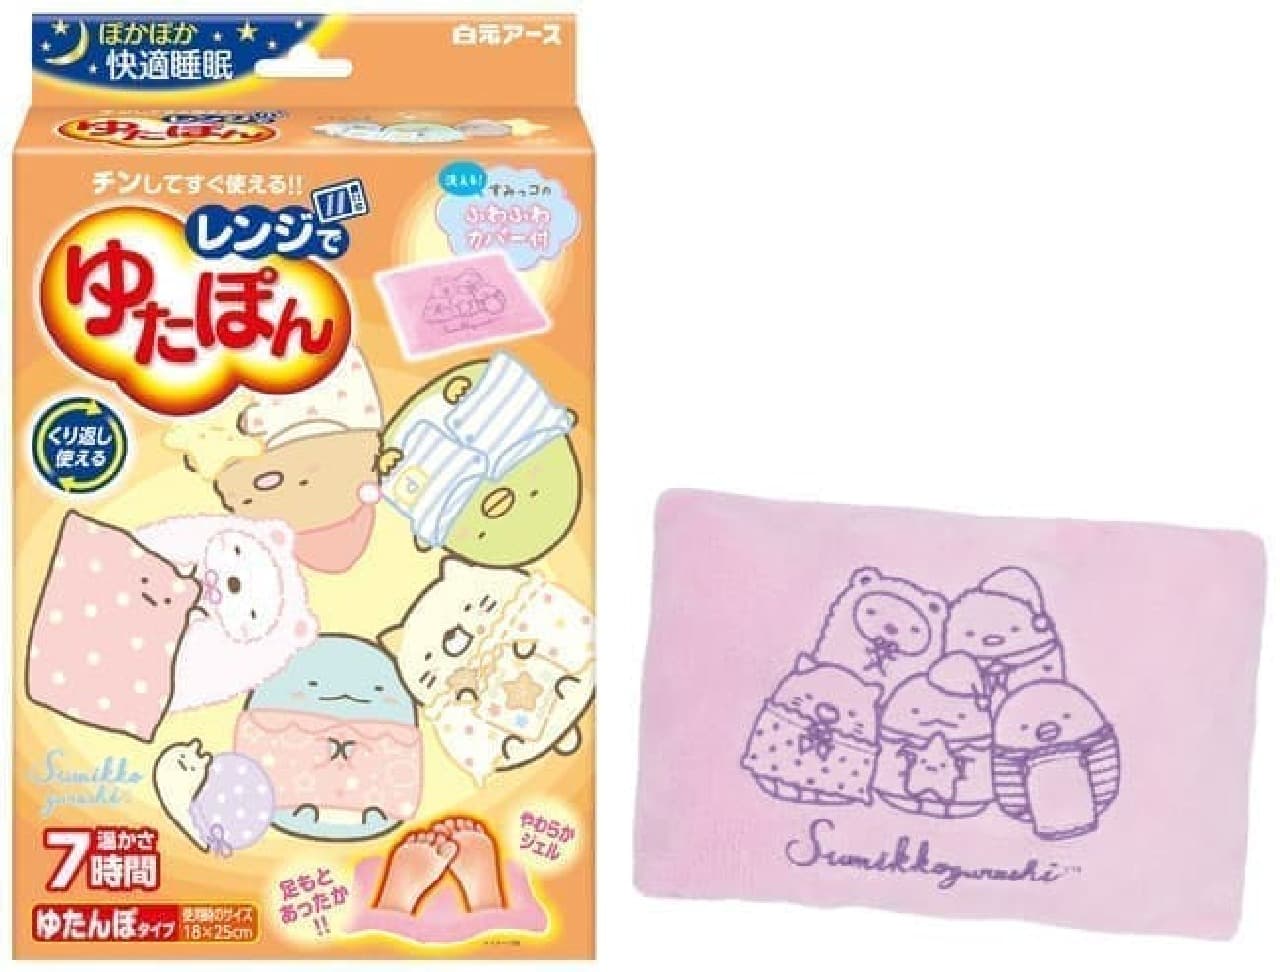 Released "Range de Yutapon Sumikko Gurashi Cover" --Soft hot water bottle that can be used repeatedly